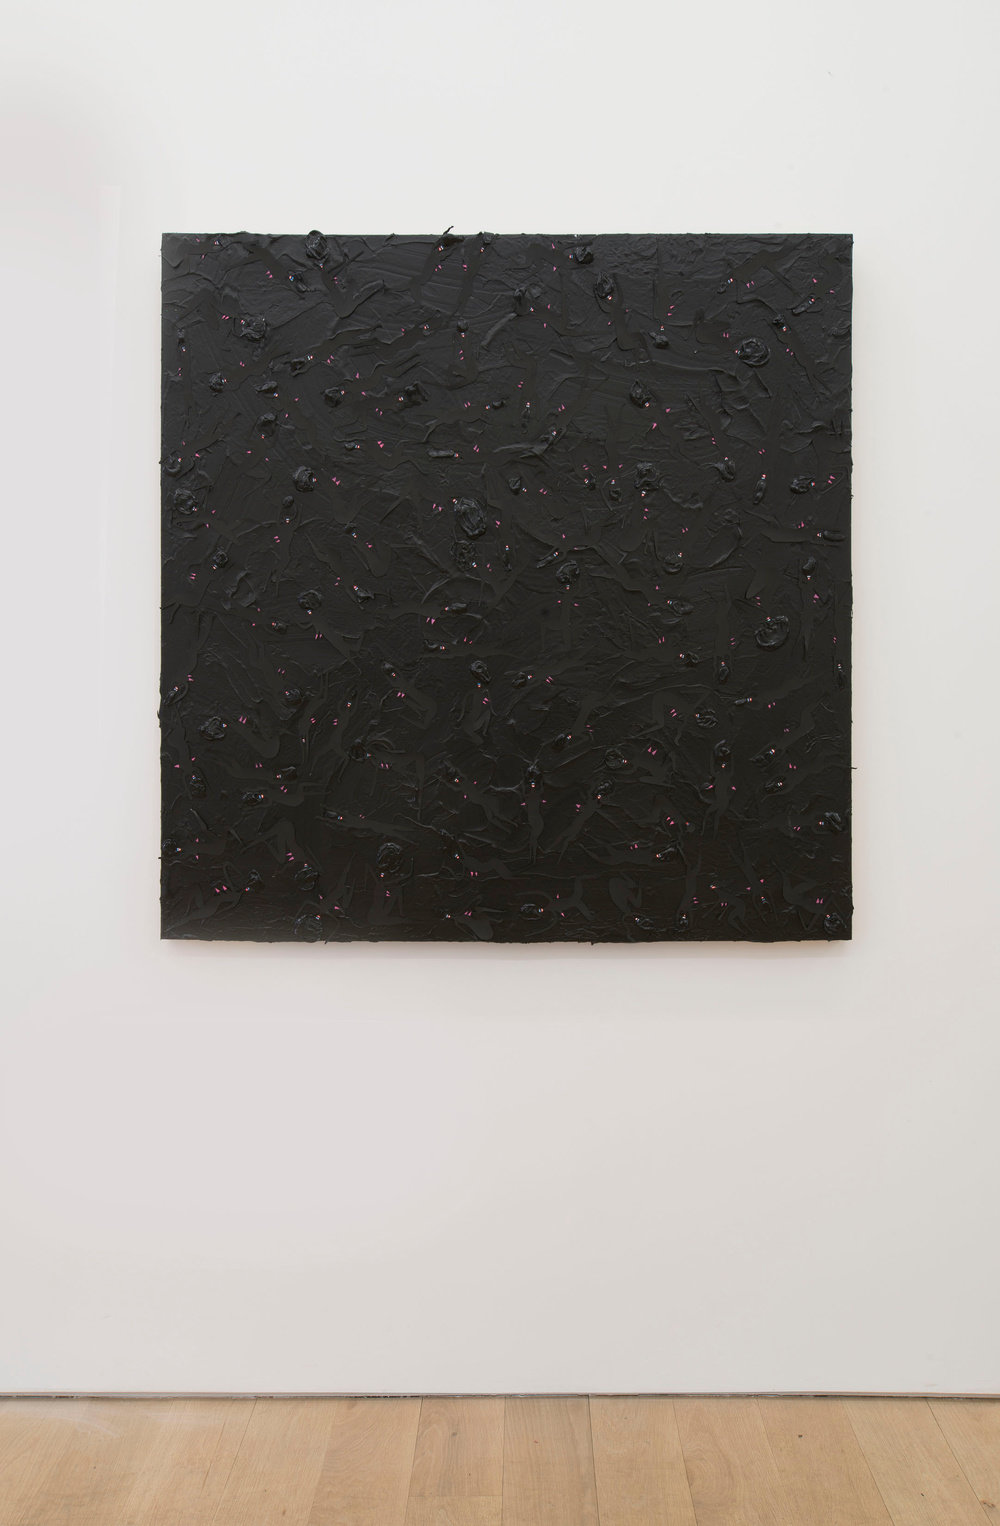 Devin troy strother, i just landed in rome, 2013, marlborough broome street, installation view 3